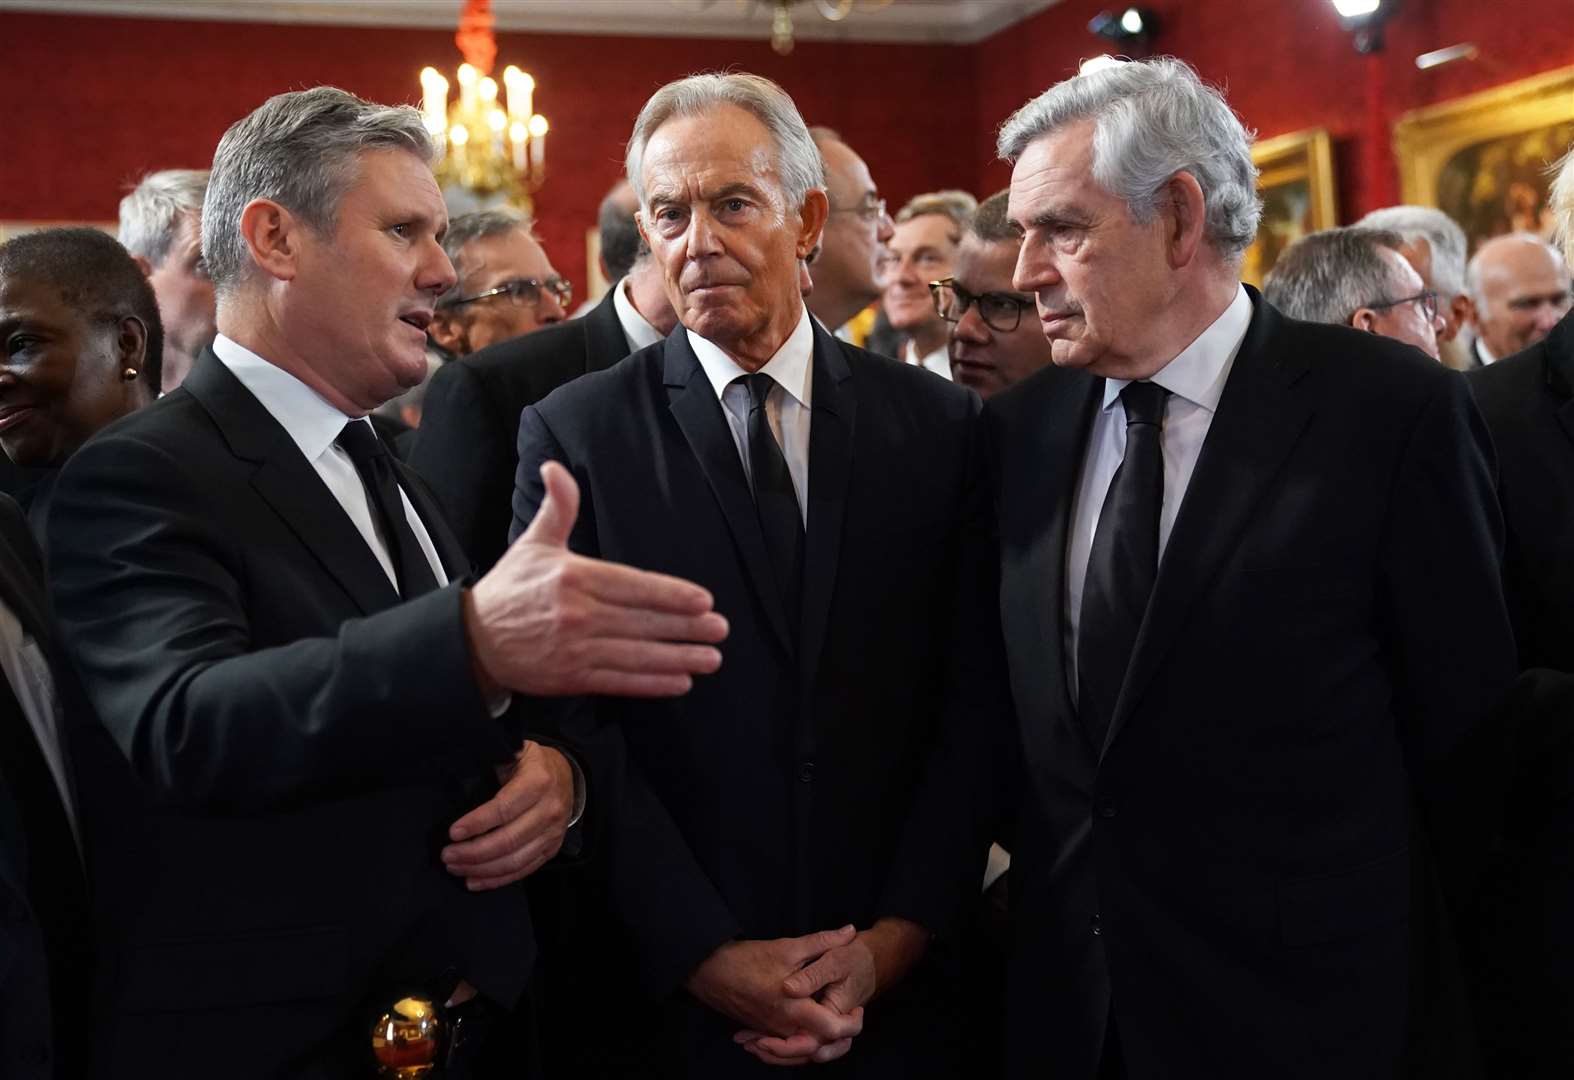 Sir Keir Starmer with Sir Tony Blair and Gordon Brown ahead of the Accession Council ceremony at St James’s Palace (Kirsty O’Connor/PA)